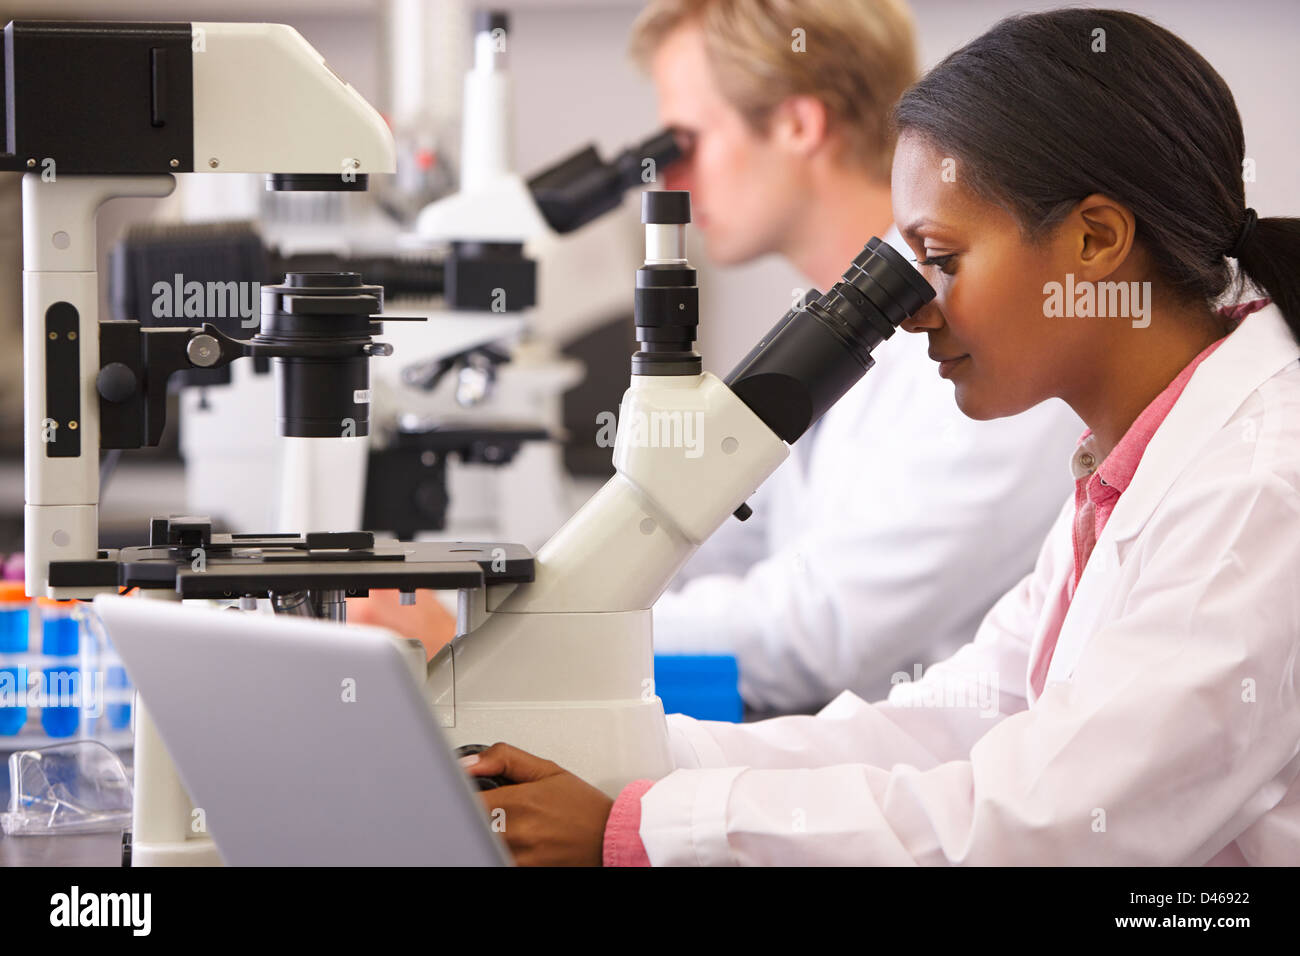 Male And Female Scientists Using Microscopes In Laboratory Stock Photo